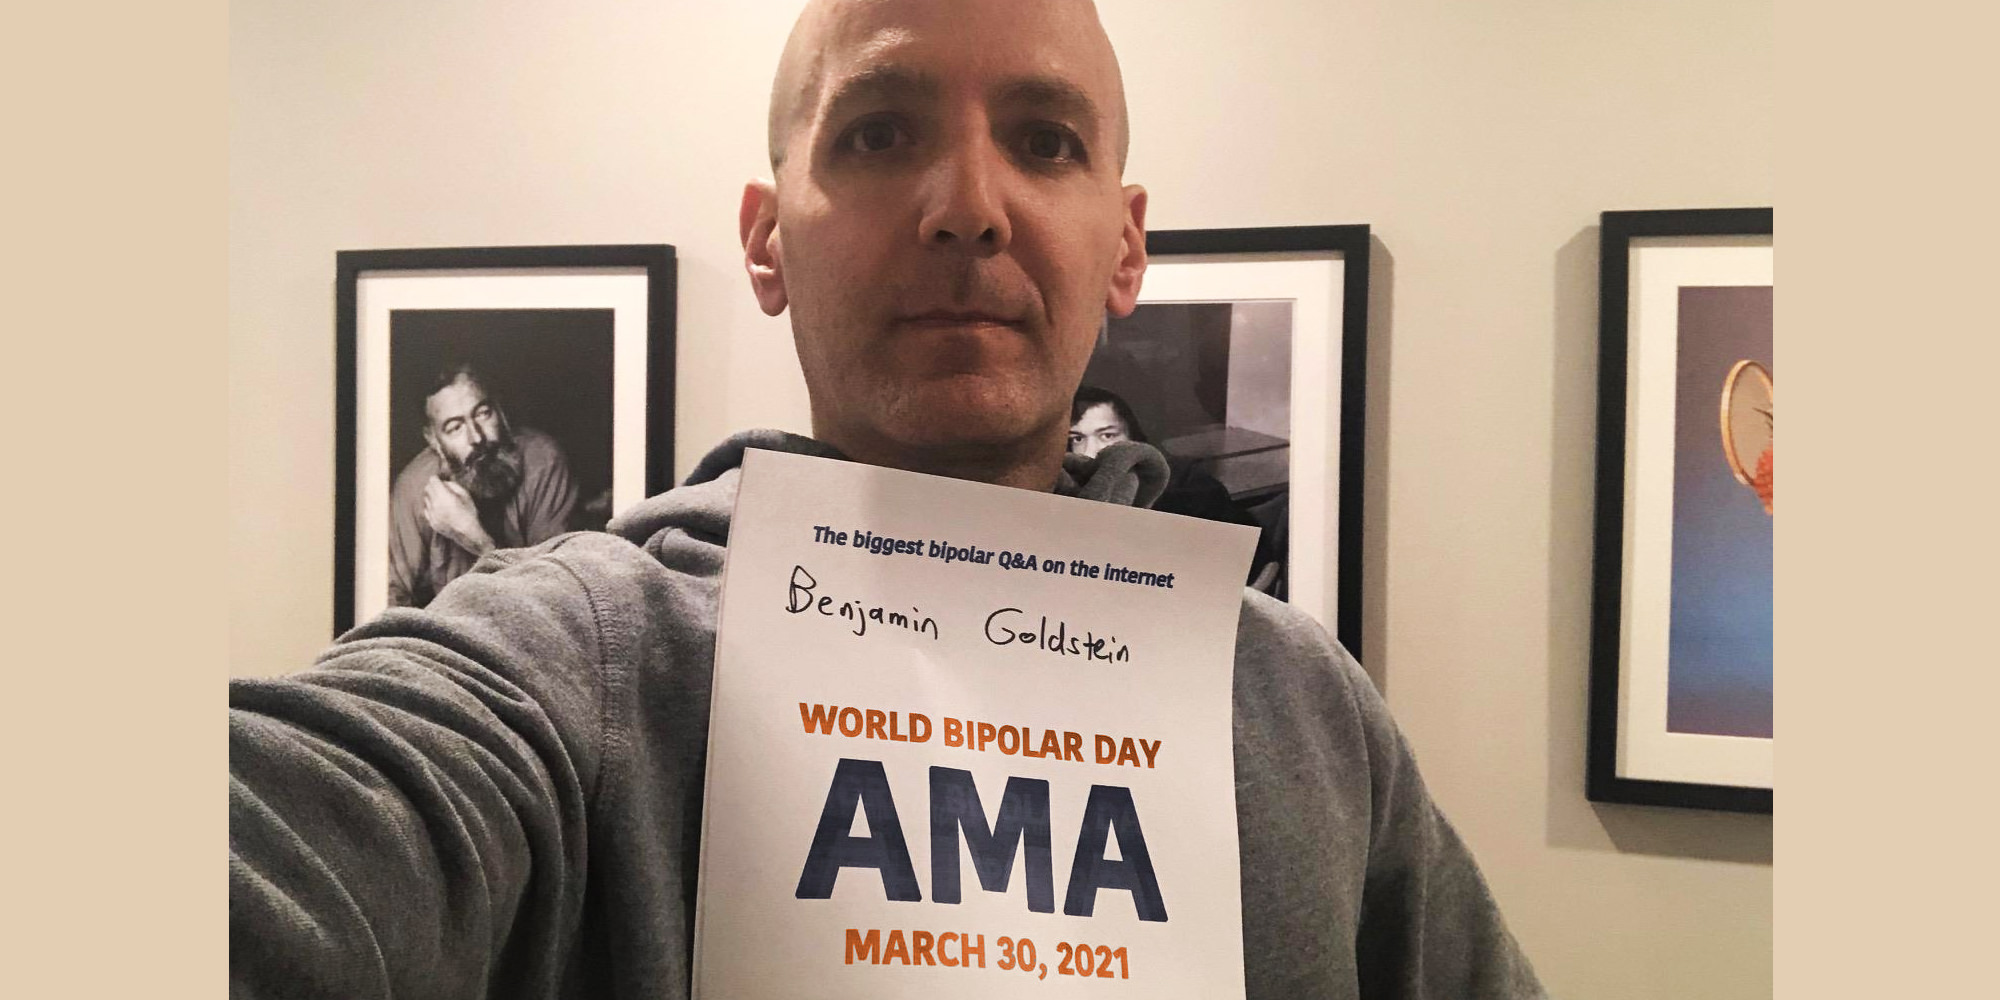 Benjamin Goldstein, is standing indoors, against framed grayscale photographs. He is white and bald and is wearing a grey hoodie. He's holding the AMA proof sign with his name printed on it.